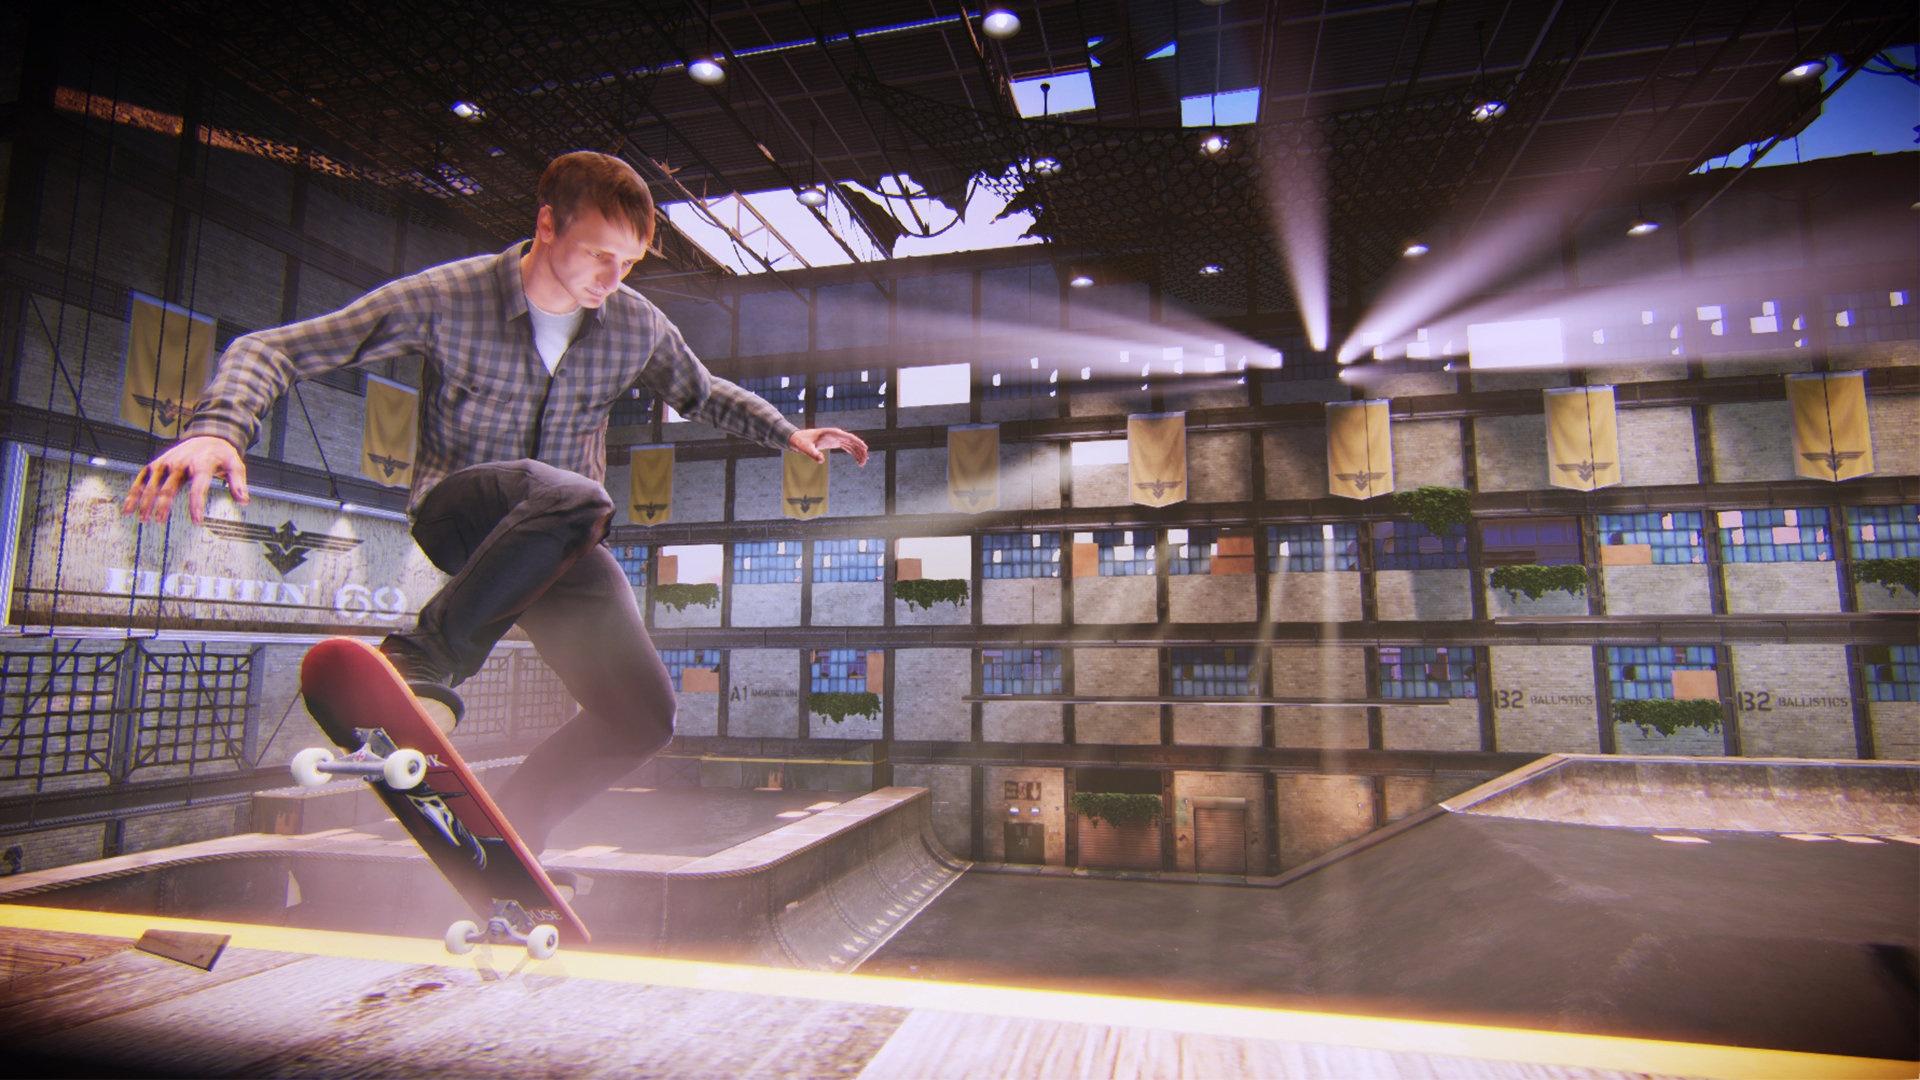 Tony Hawk's Pro Skater 5 Has a PS4 Patch Bigger Than the Game